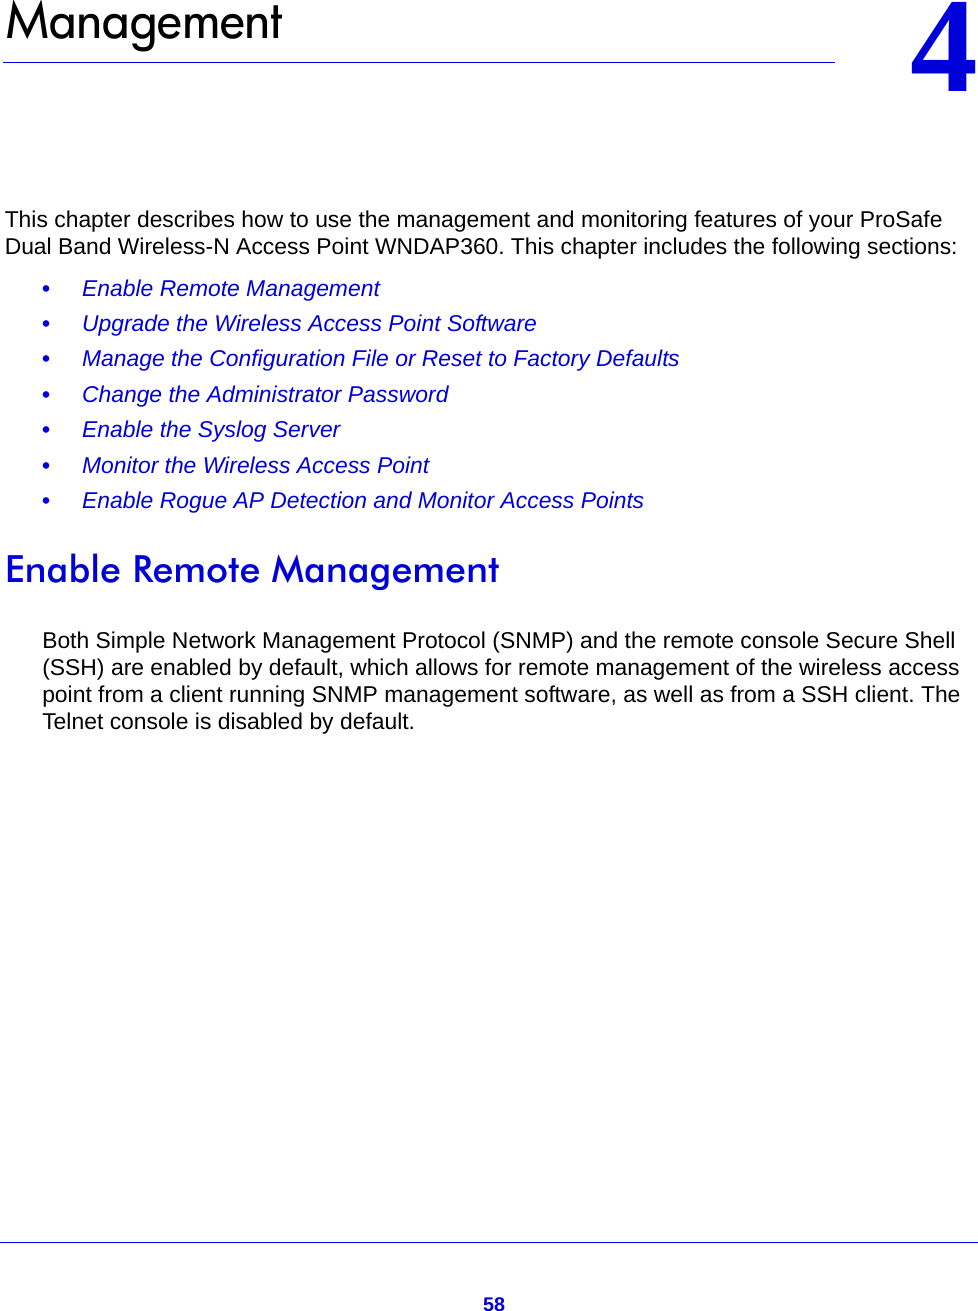 5844.   ManagementThis chapter describes how to use the management and monitoring features of your ProSafe Dual Band Wireless-N Access Point WNDAP360. This chapter includes the following sections:•     Enable Remote Management •     Upgrade the Wireless Access Point Software •     Manage the Configuration File or Reset to Factory Defaults •     Change the Administrator Password •     Enable the Syslog Server •     Monitor the Wireless Access Point •     Enable Rogue AP Detection and Monitor Access Points Enable Remote ManagementBoth Simple Network Management Protocol (SNMP) and the remote console Secure Shell (SSH) are enabled by default, which allows for remote management of the wireless access point from a client running SNMP management software, as well as from a SSH client. The Telnet console is disabled by default.